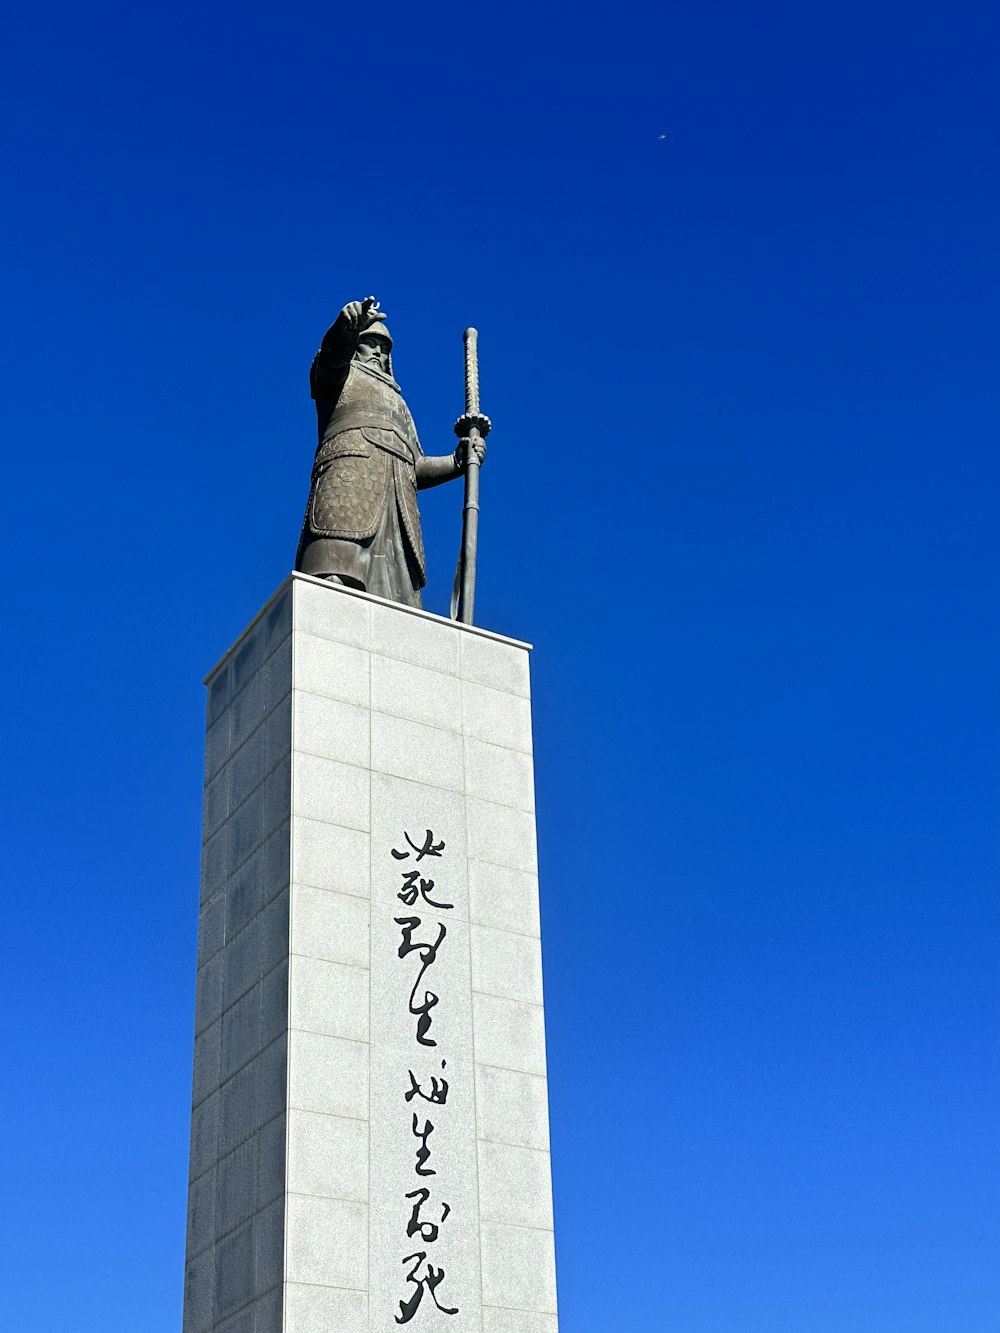 a statue of a man holding a sword in front of a blue sky